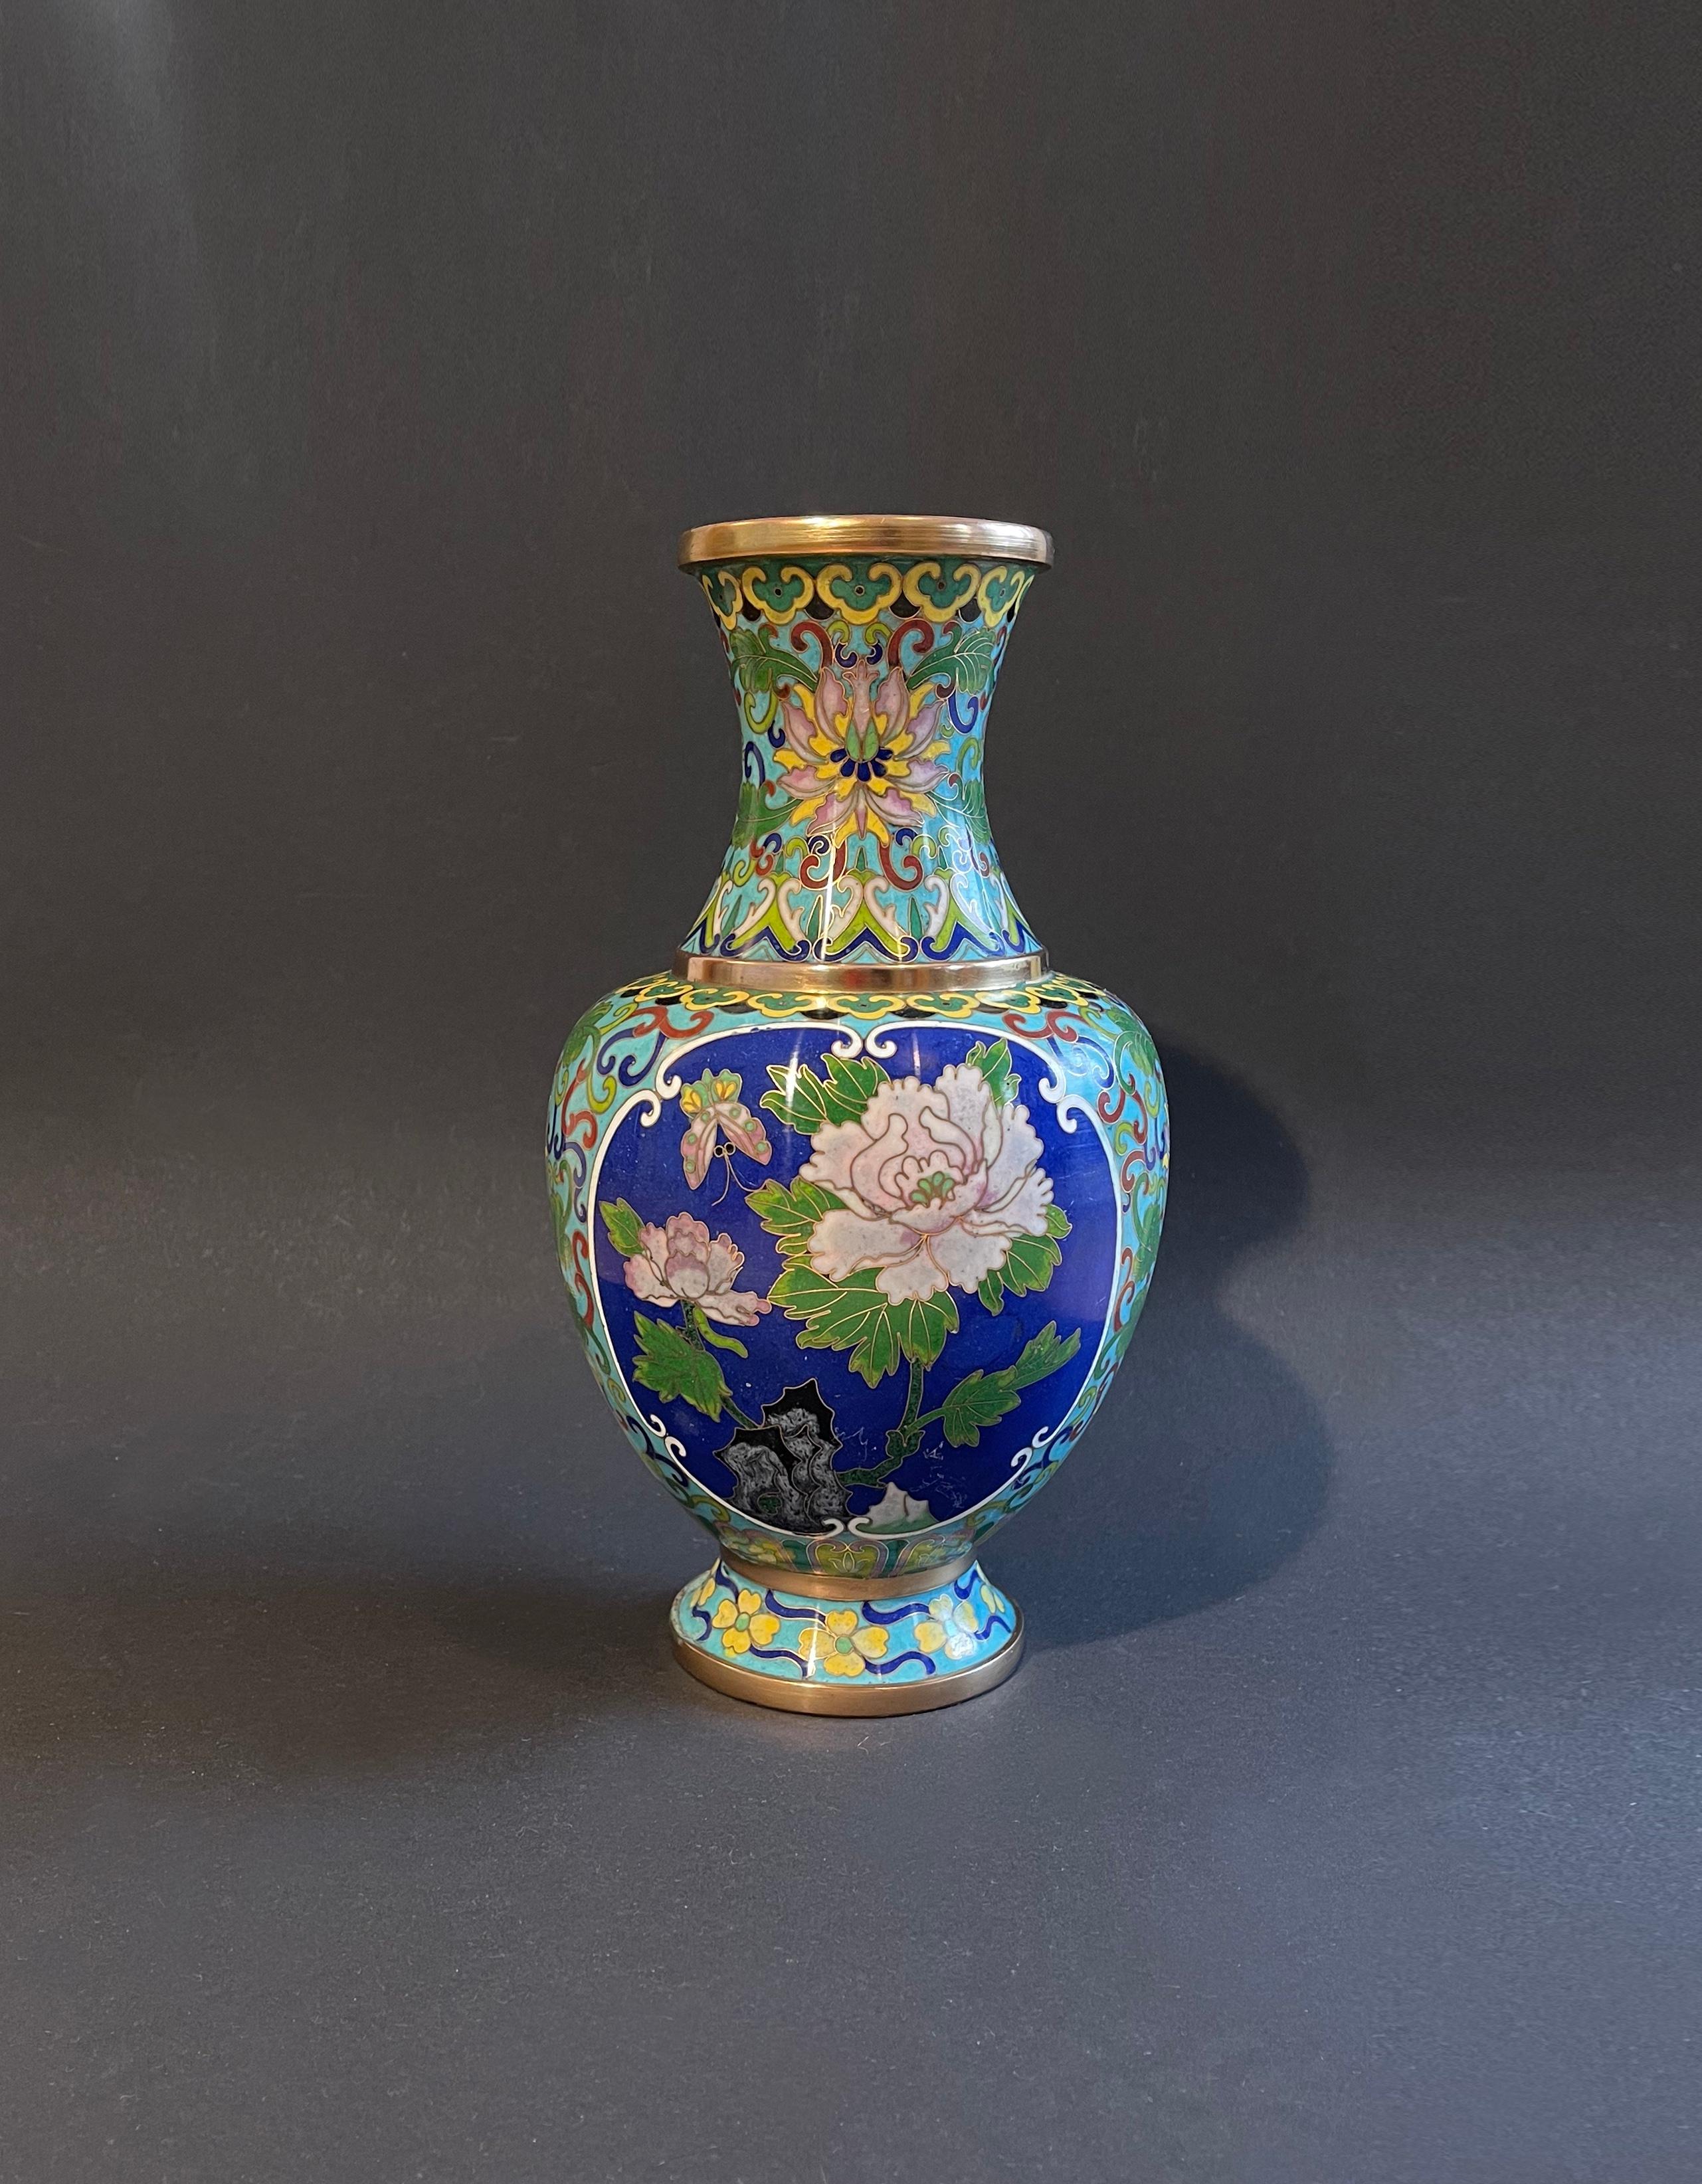 Expressive and intricately detailed Cloisonné bowl of medium size in turquoise, lapis blue, yellow & green.
The metal filigree in brass beautifully detailed with butterflies, chrysanthemum in a mild pink and other flowers with leaves and some purple